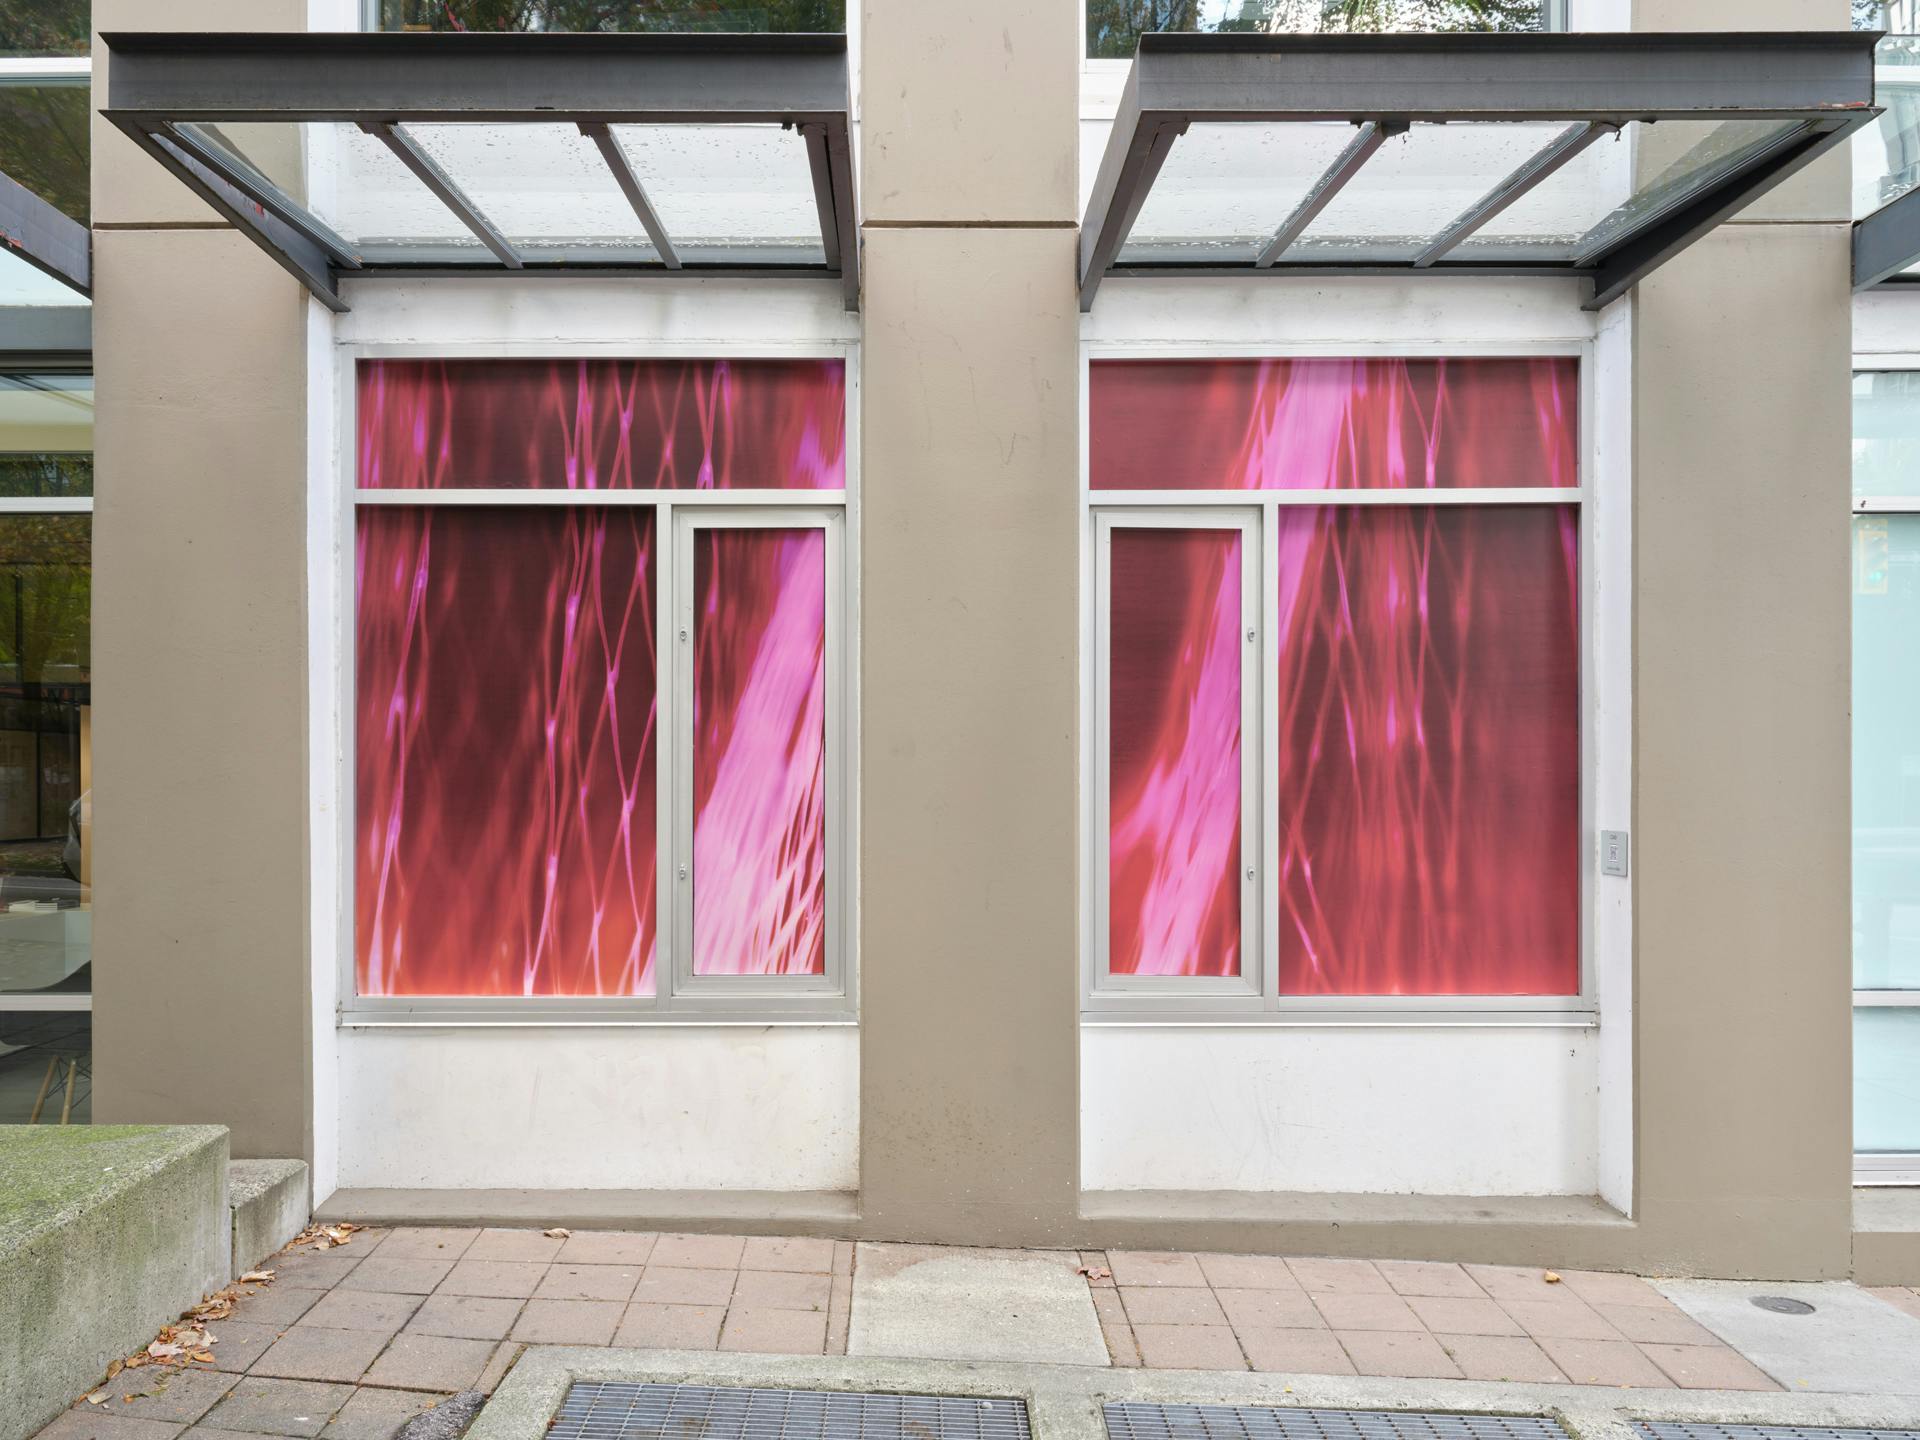 "A pair of windows featuring a pair of photograms depicting nylon produce bags in neon pink and red colours. "